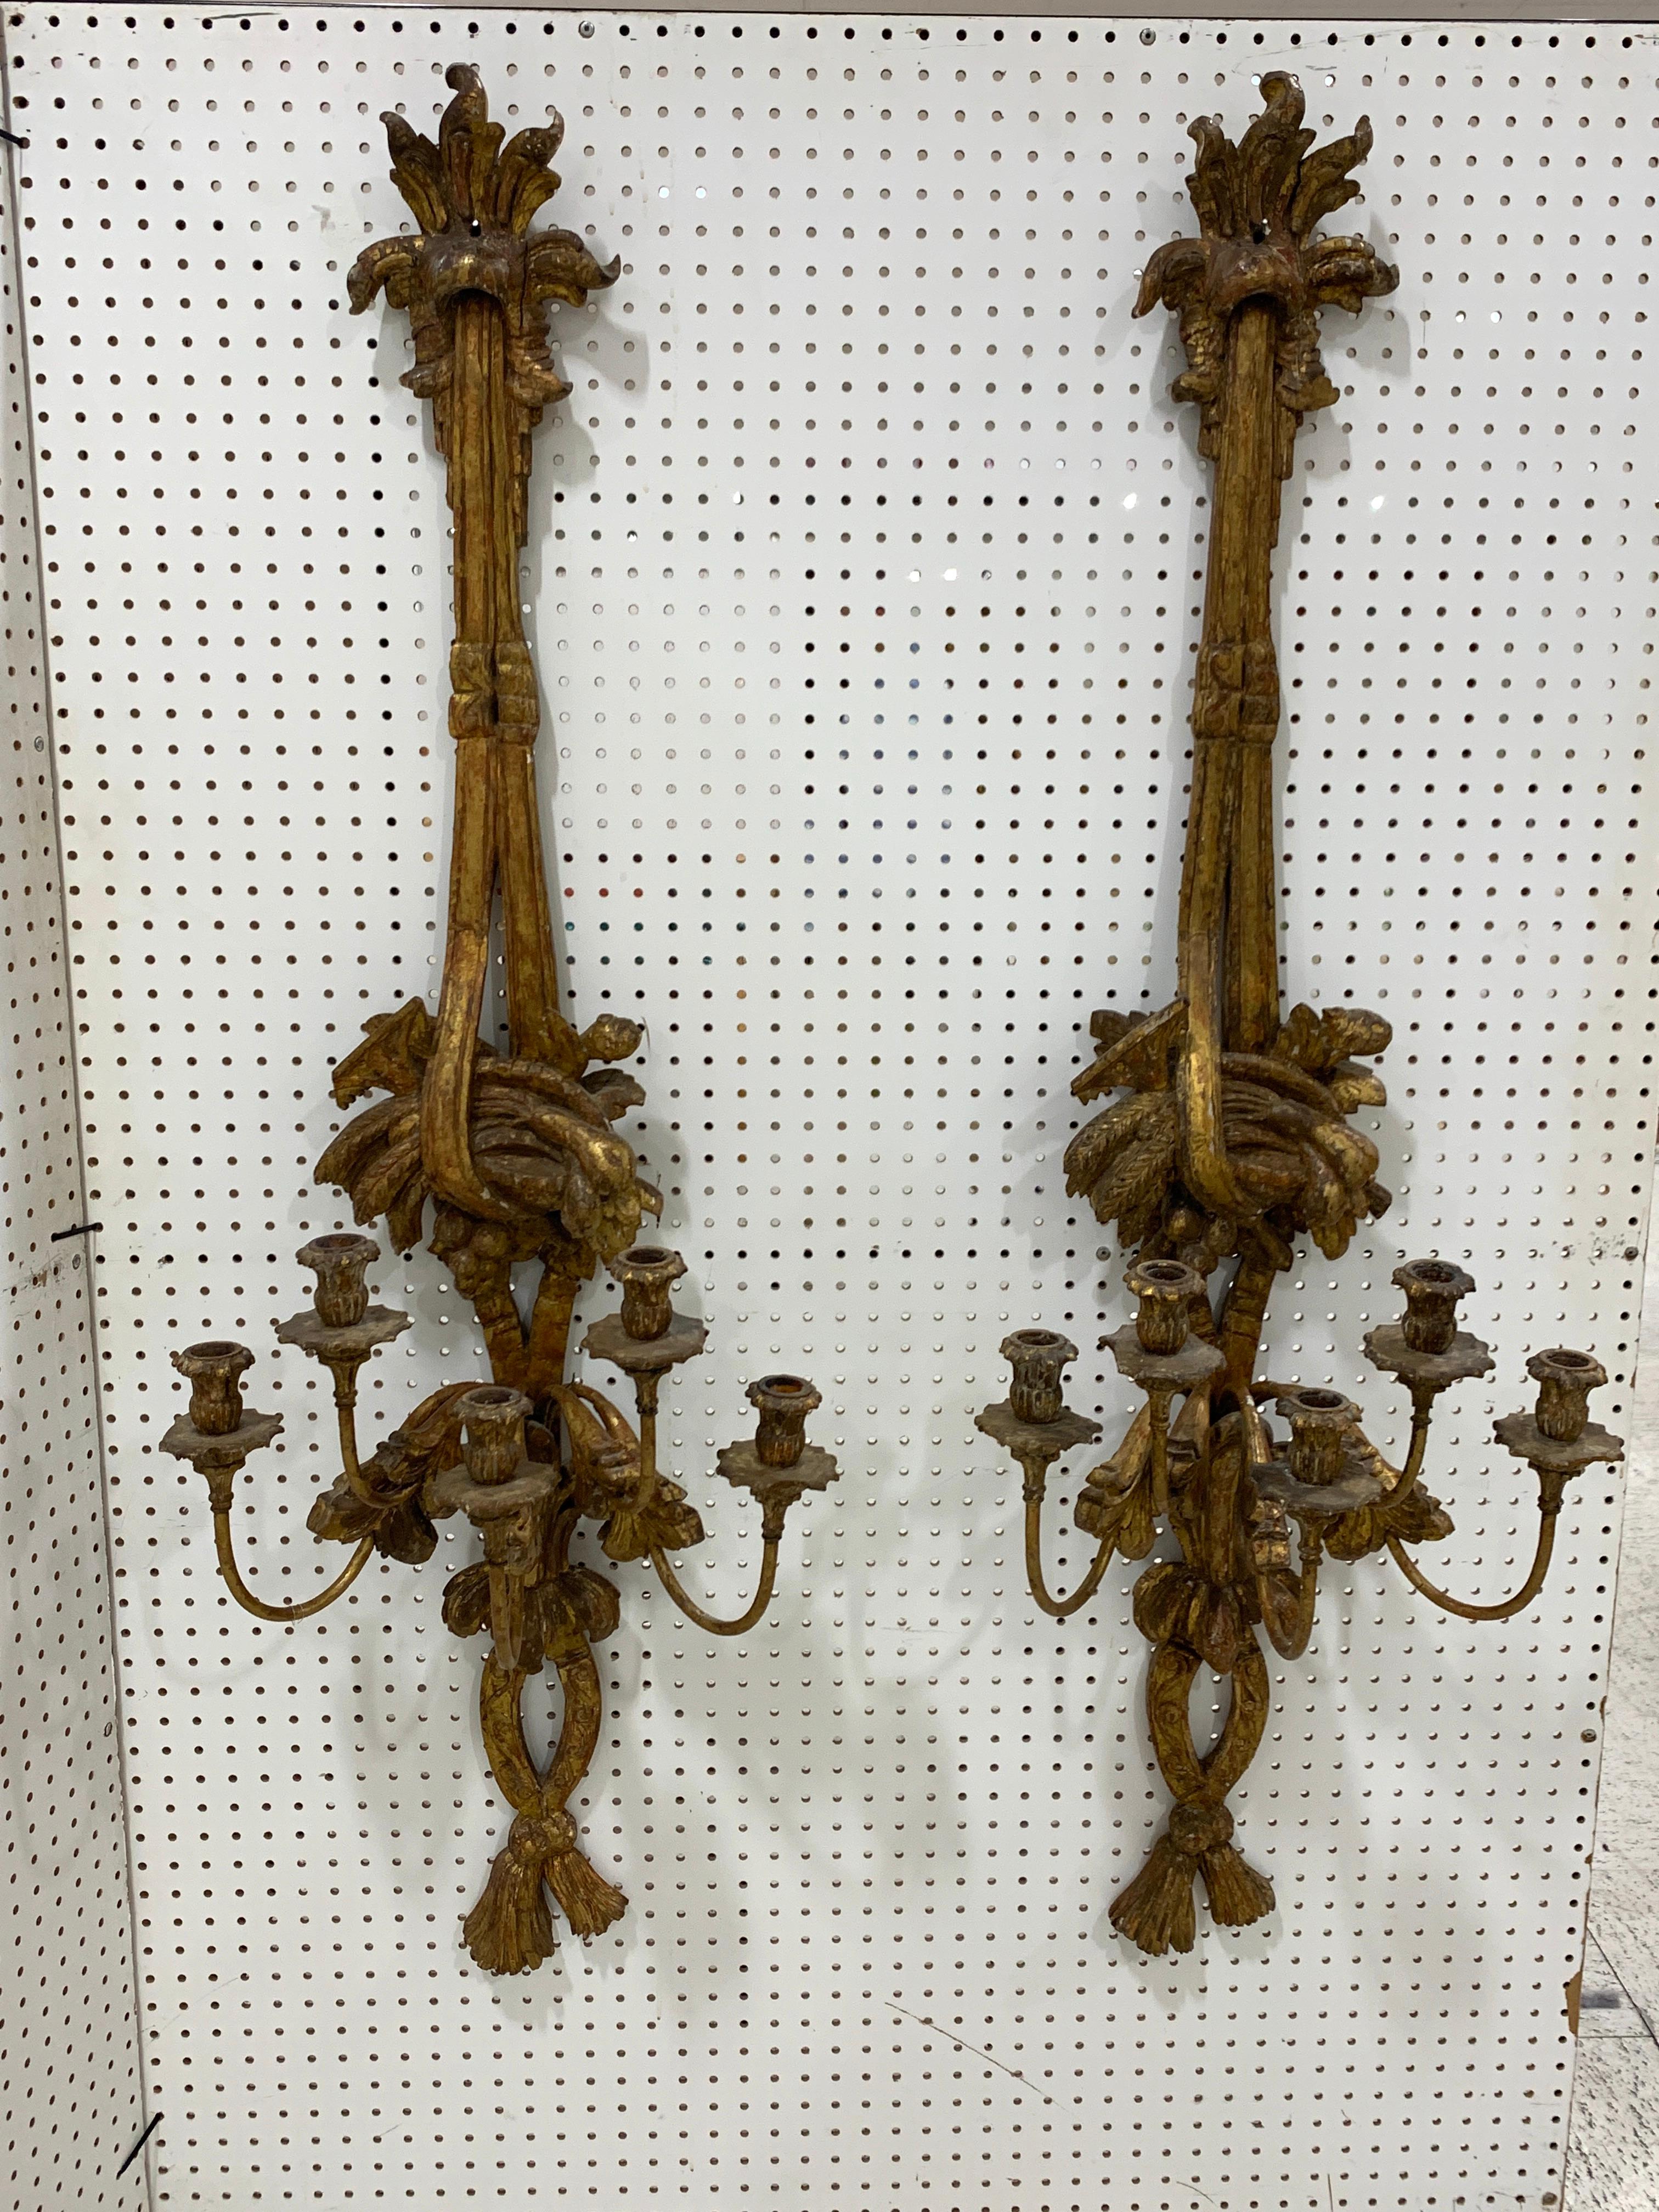 Pair of Louis XVI giltwood wall five-light appliques, of rare and unusual size, subtle carving with ribbons and tassels, with a central bouquet of five candle lights.